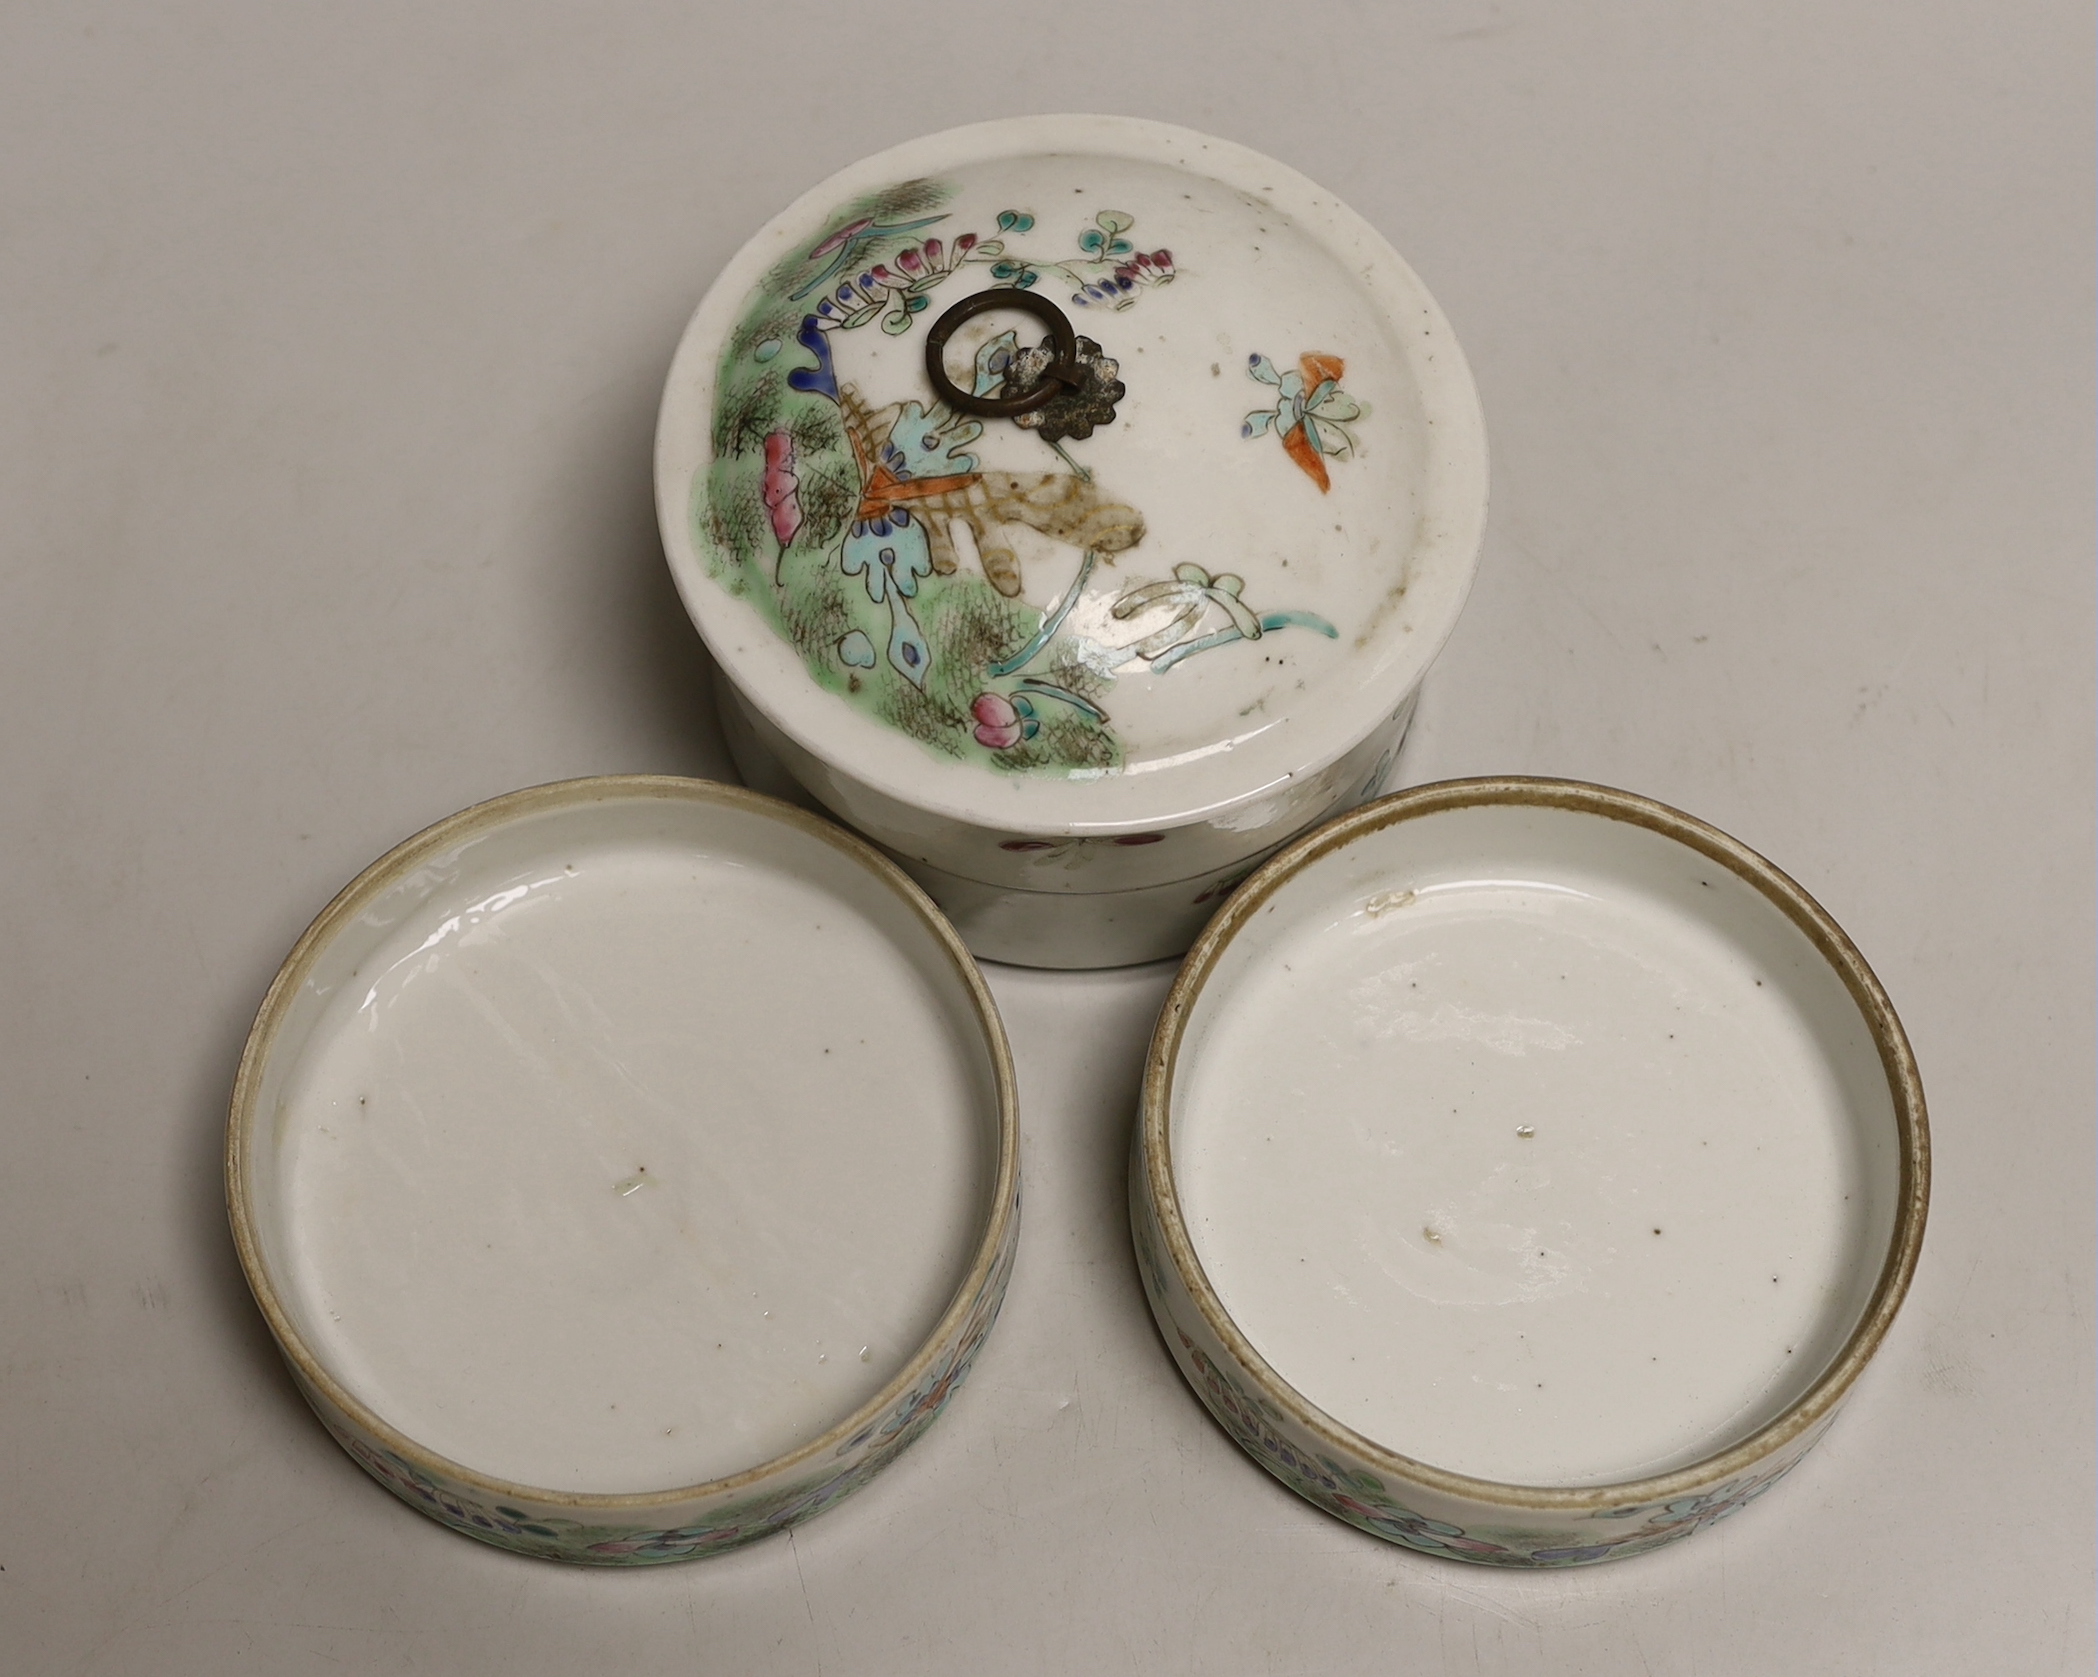 An early 20th century Chinese stacking food container, 13.5cm - Image 4 of 5